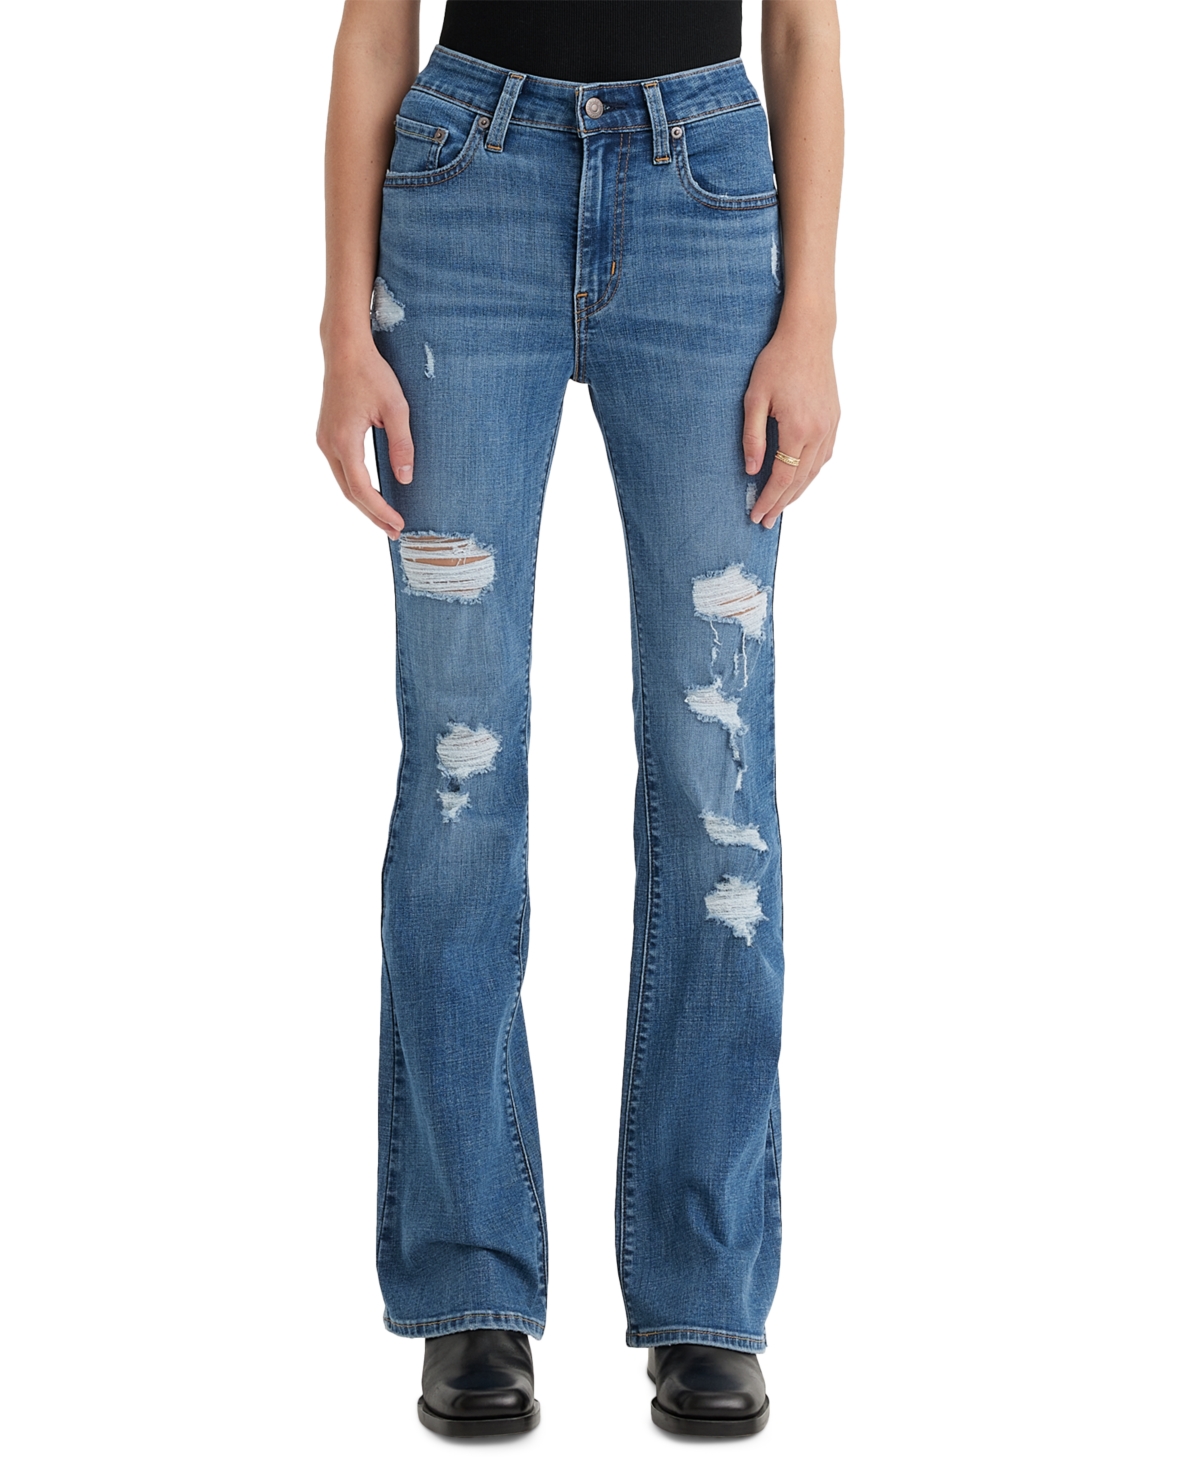 Women's 726 High Rise Slim Fit Flare Jeans - Prime Location